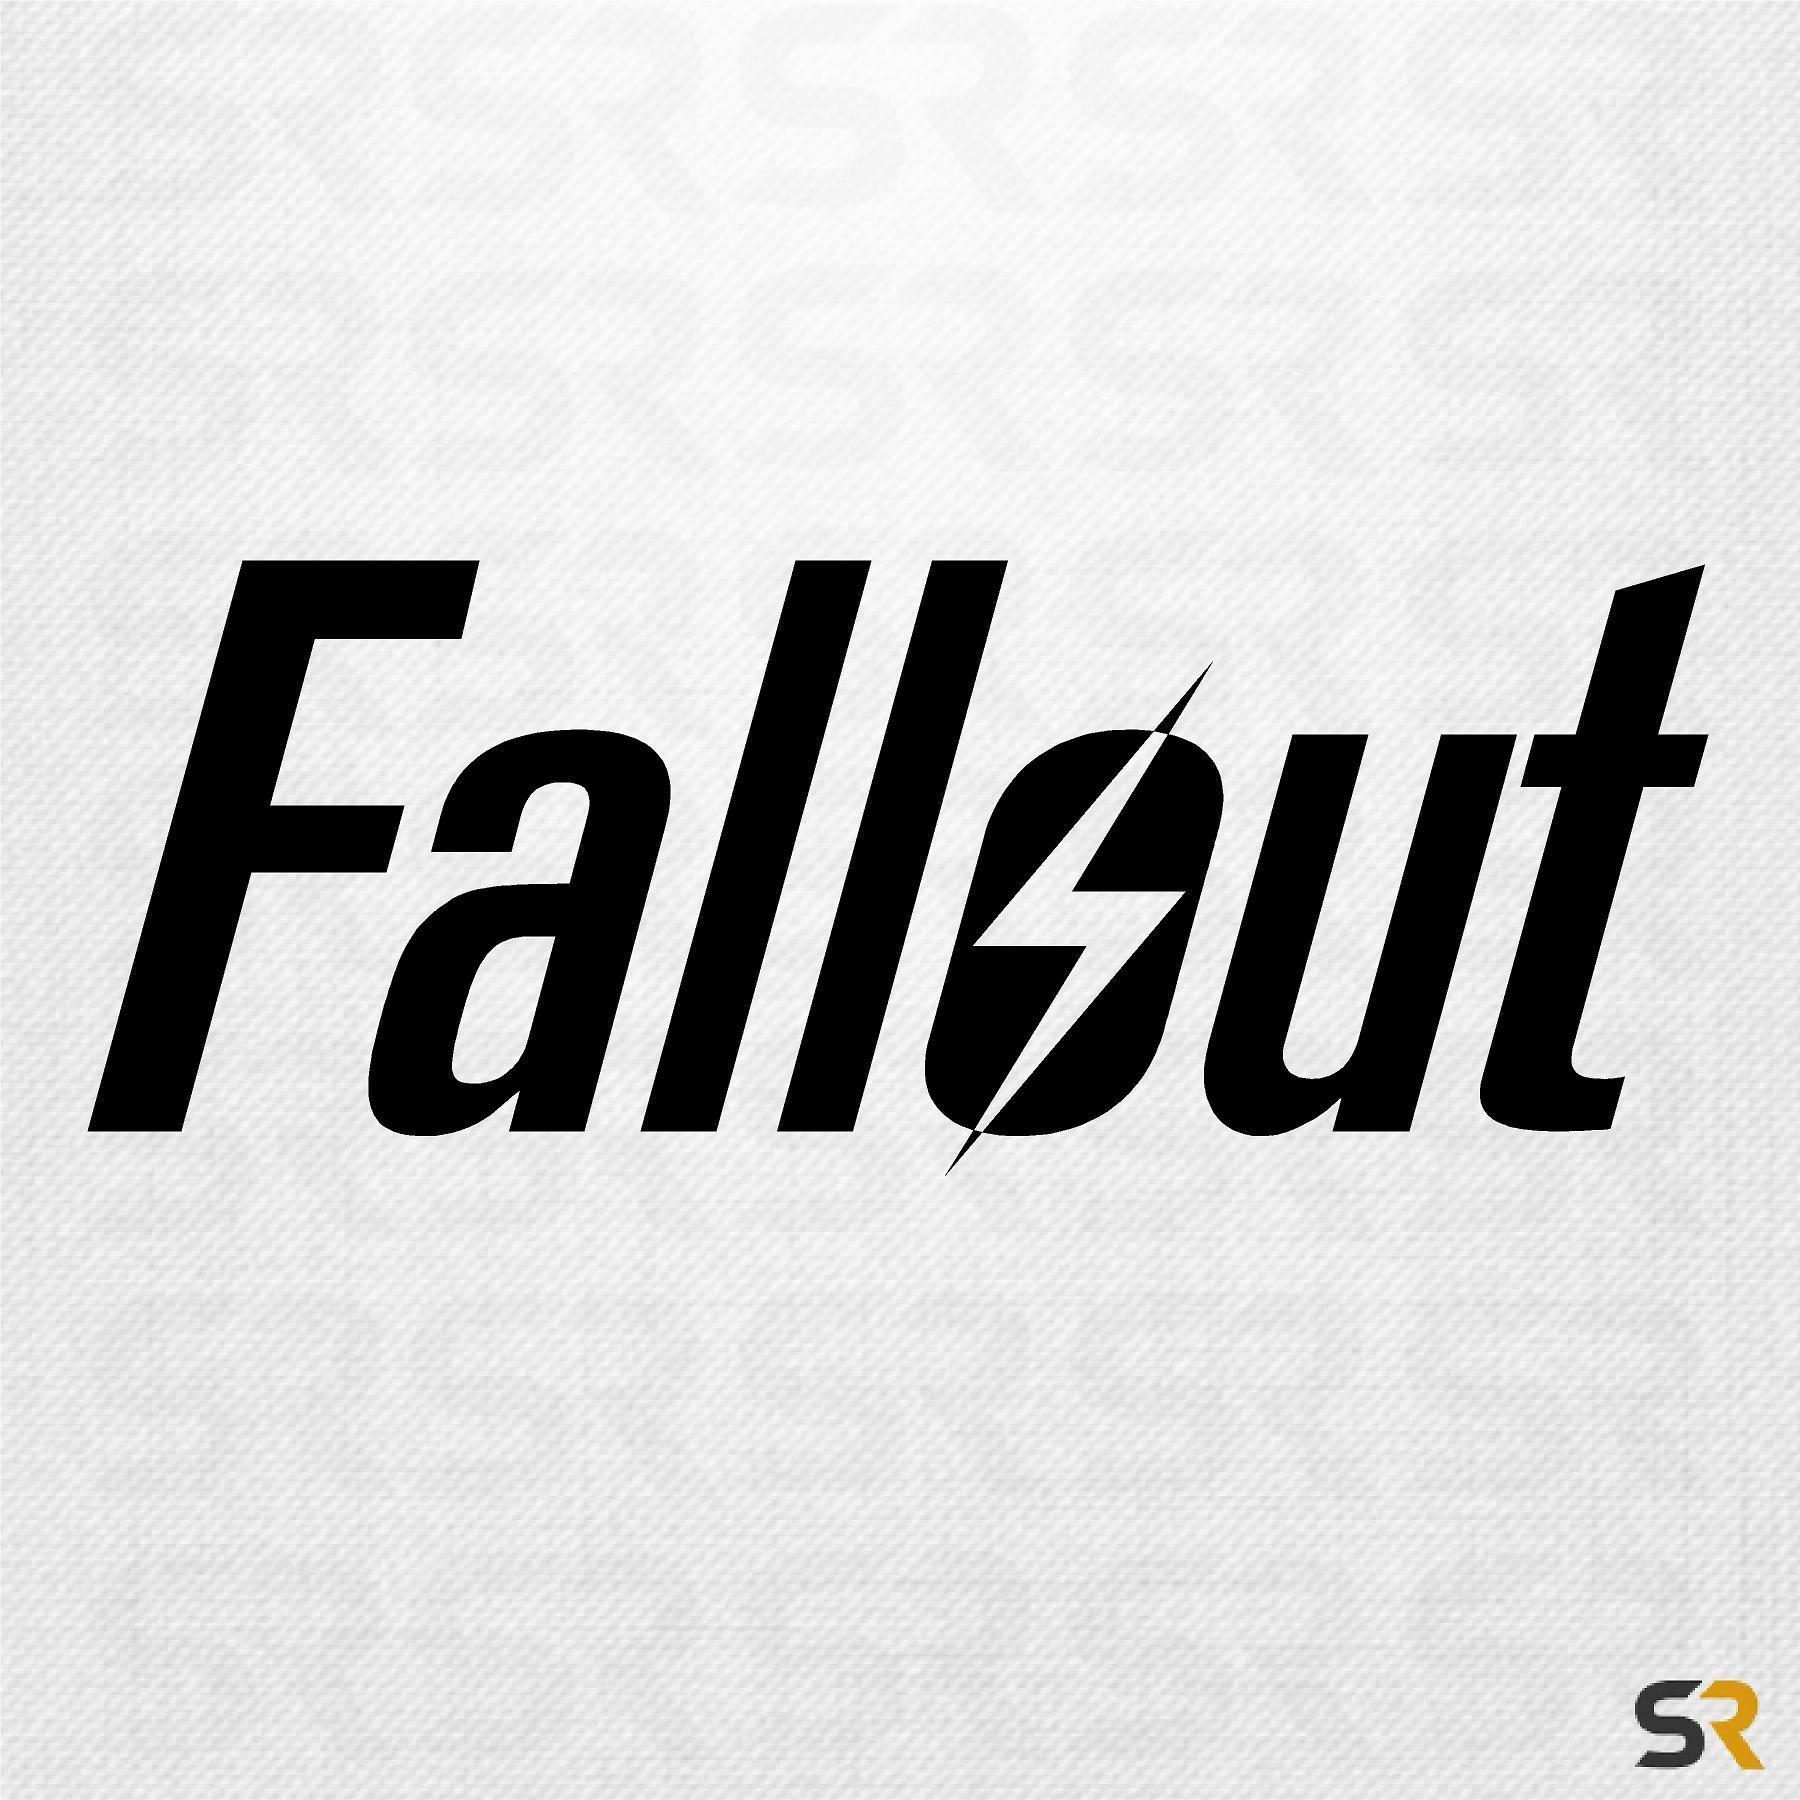 Fallout Logo - Fallout Logo Vinyl Decal. Choose your decal size and color from the ...